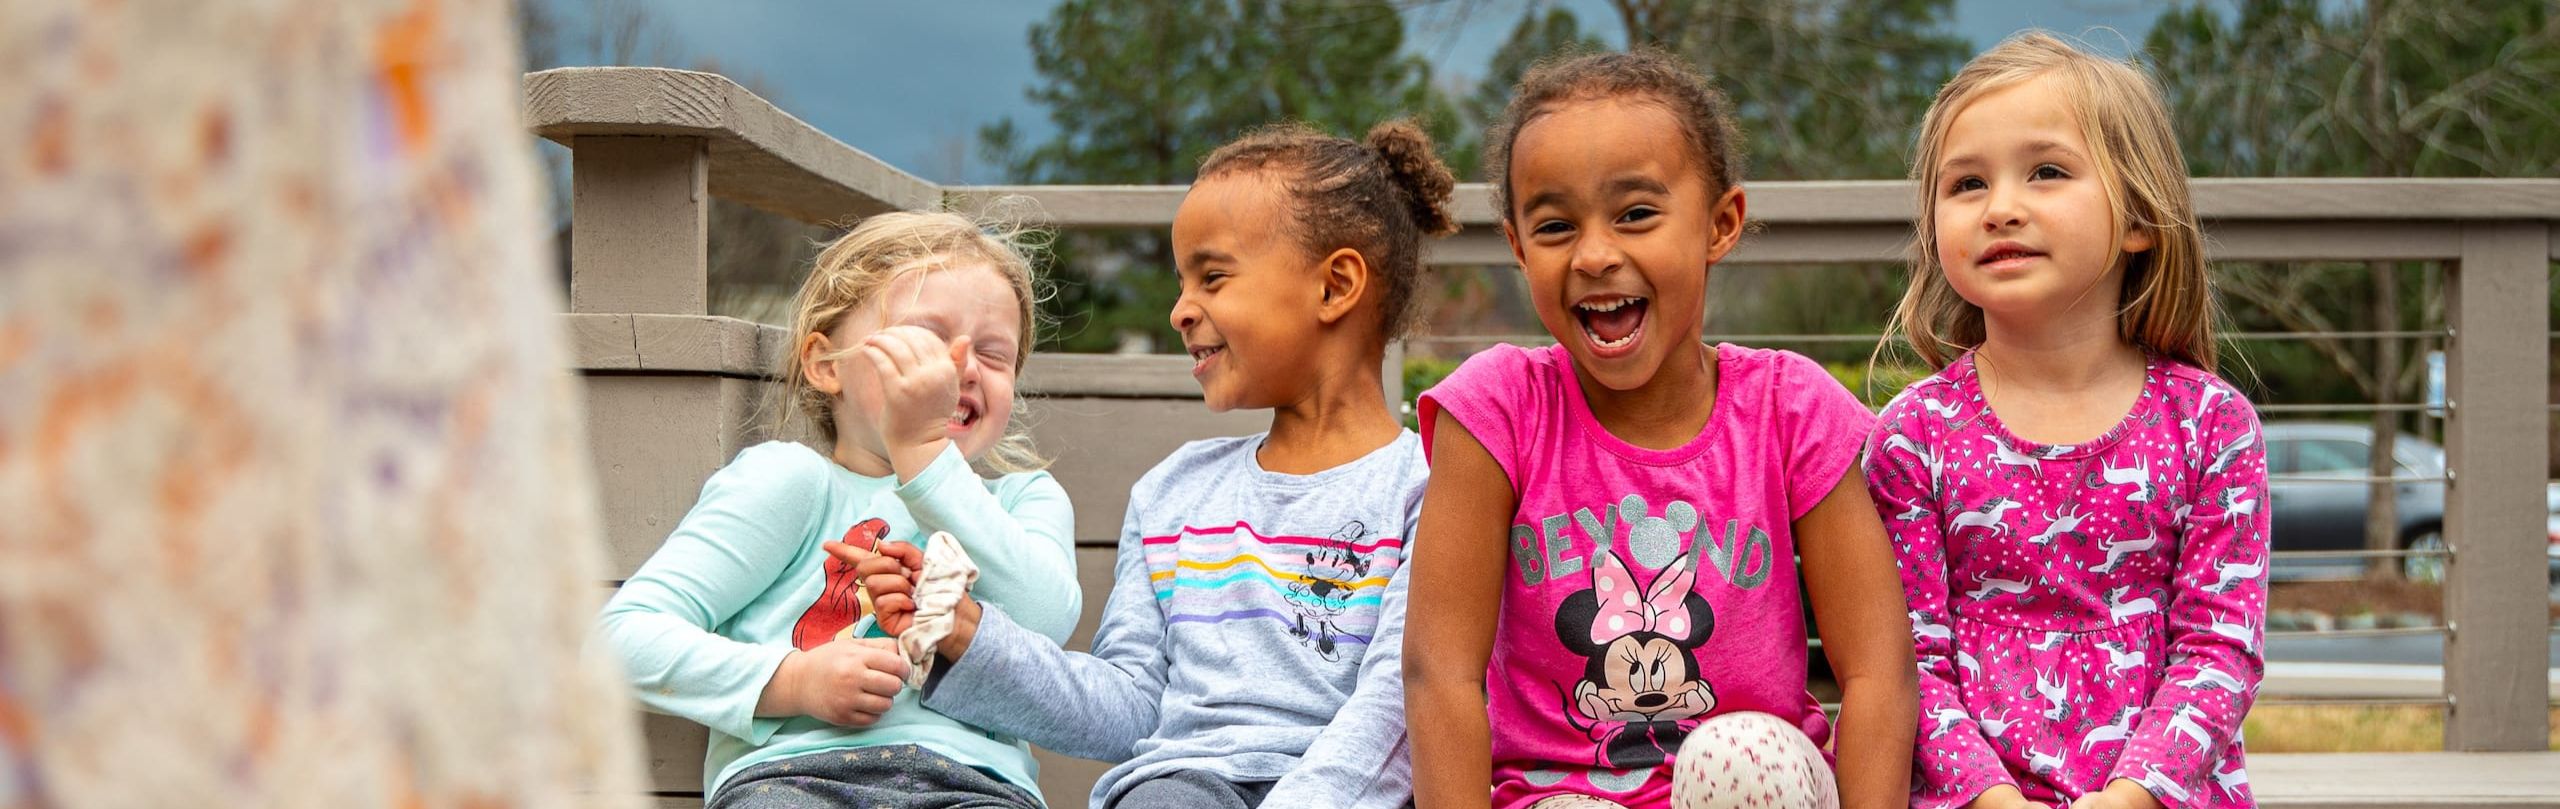 Joyful young students in vibrant attire laughing together on an outdoor bench at Trinity School, exemplifying the school's nurturing after-care program and community spirit.